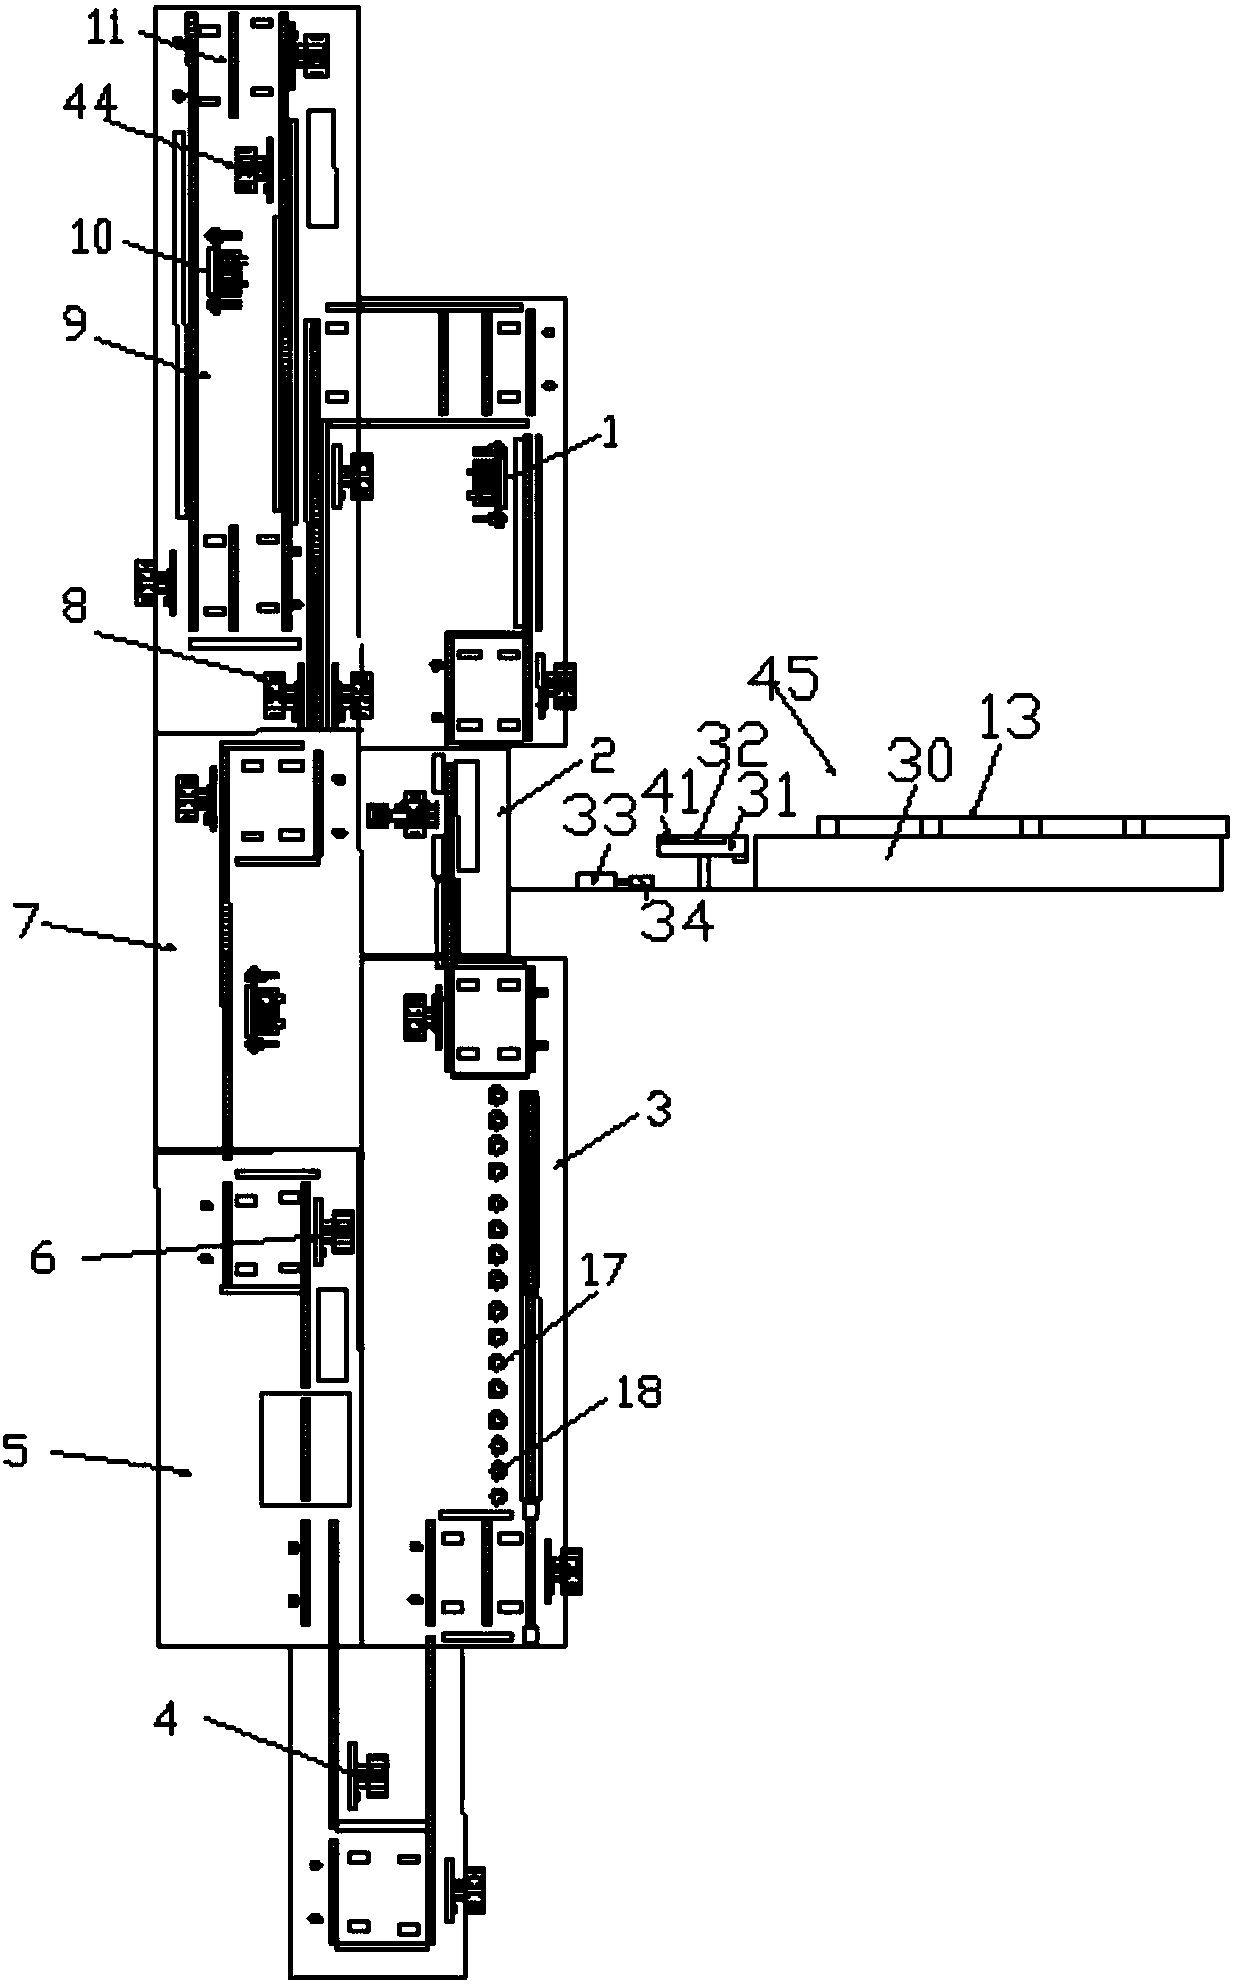 Automatic hypodermic needle assembling system